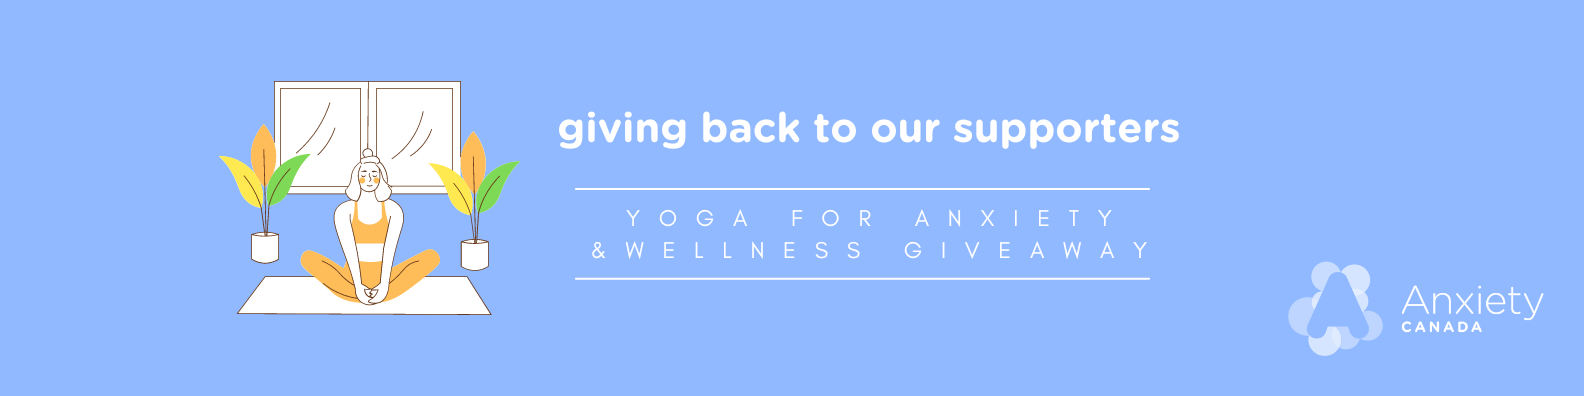 Yoga for Anxiety Event & Wellness Giveaway, Blog